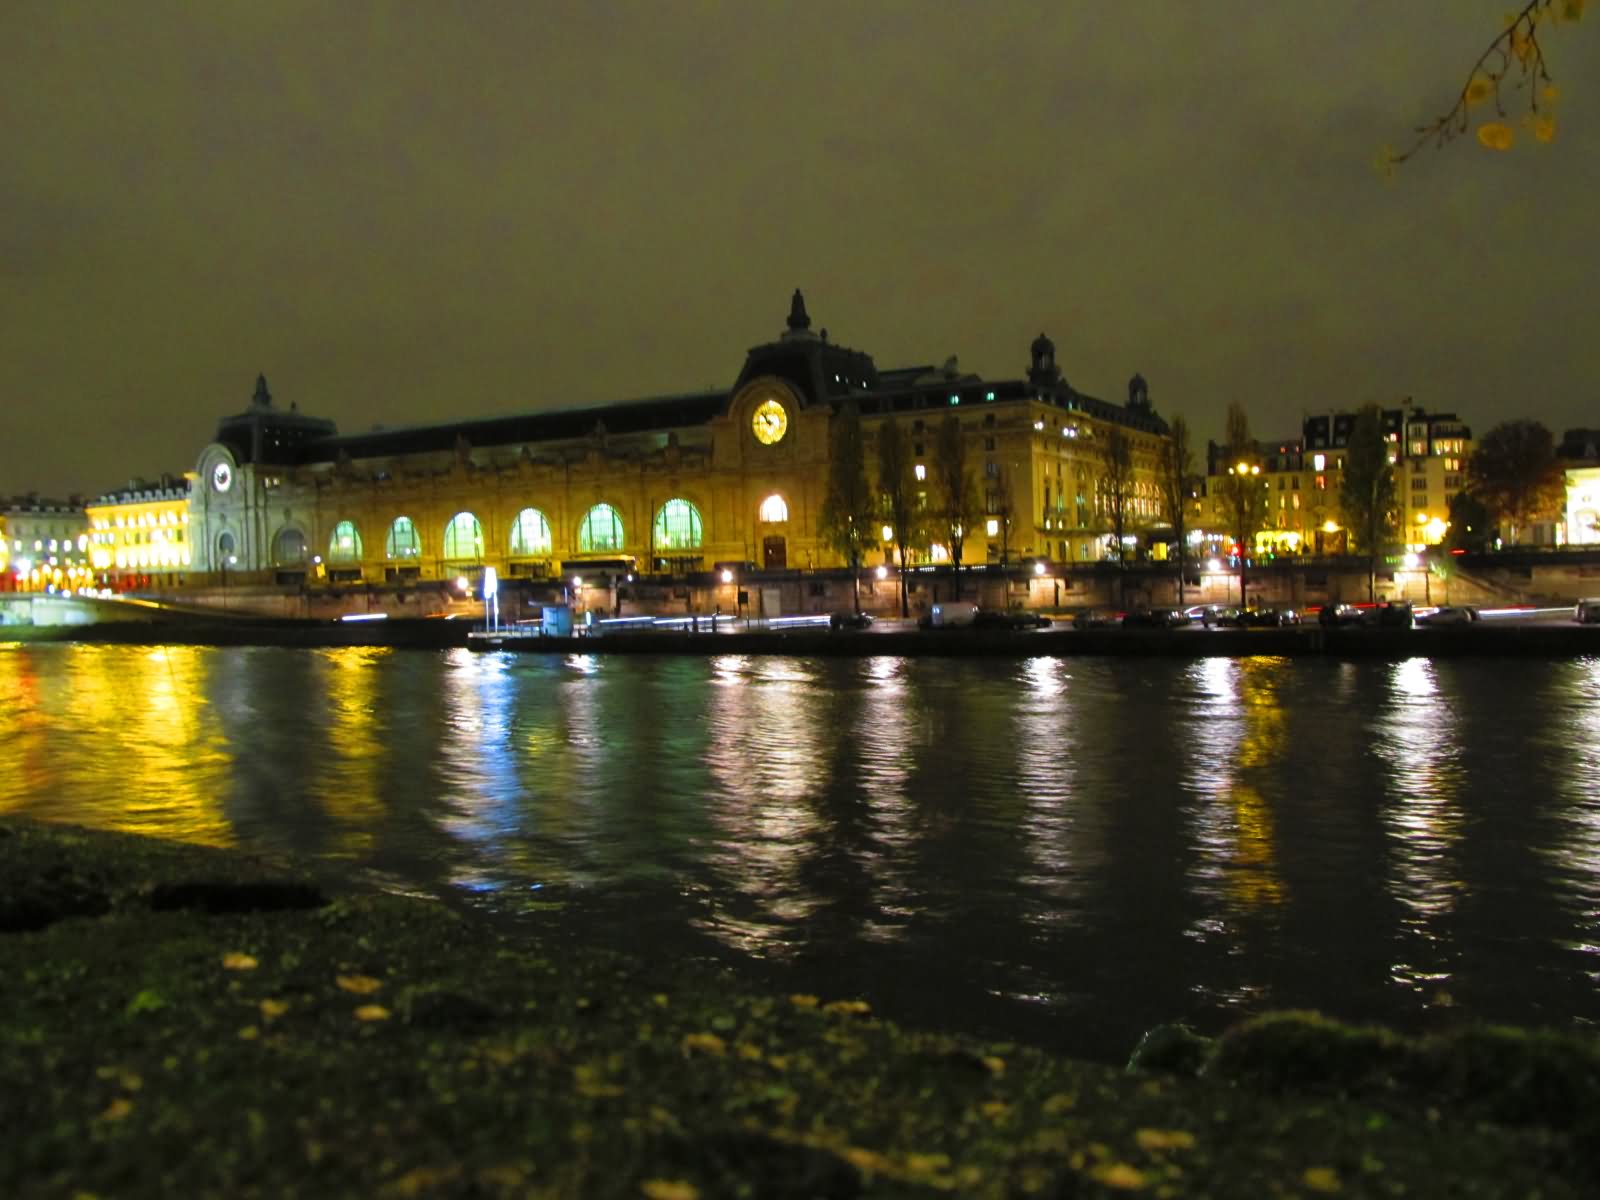 View Of Musée d'Orsay At Night From Across The Seine